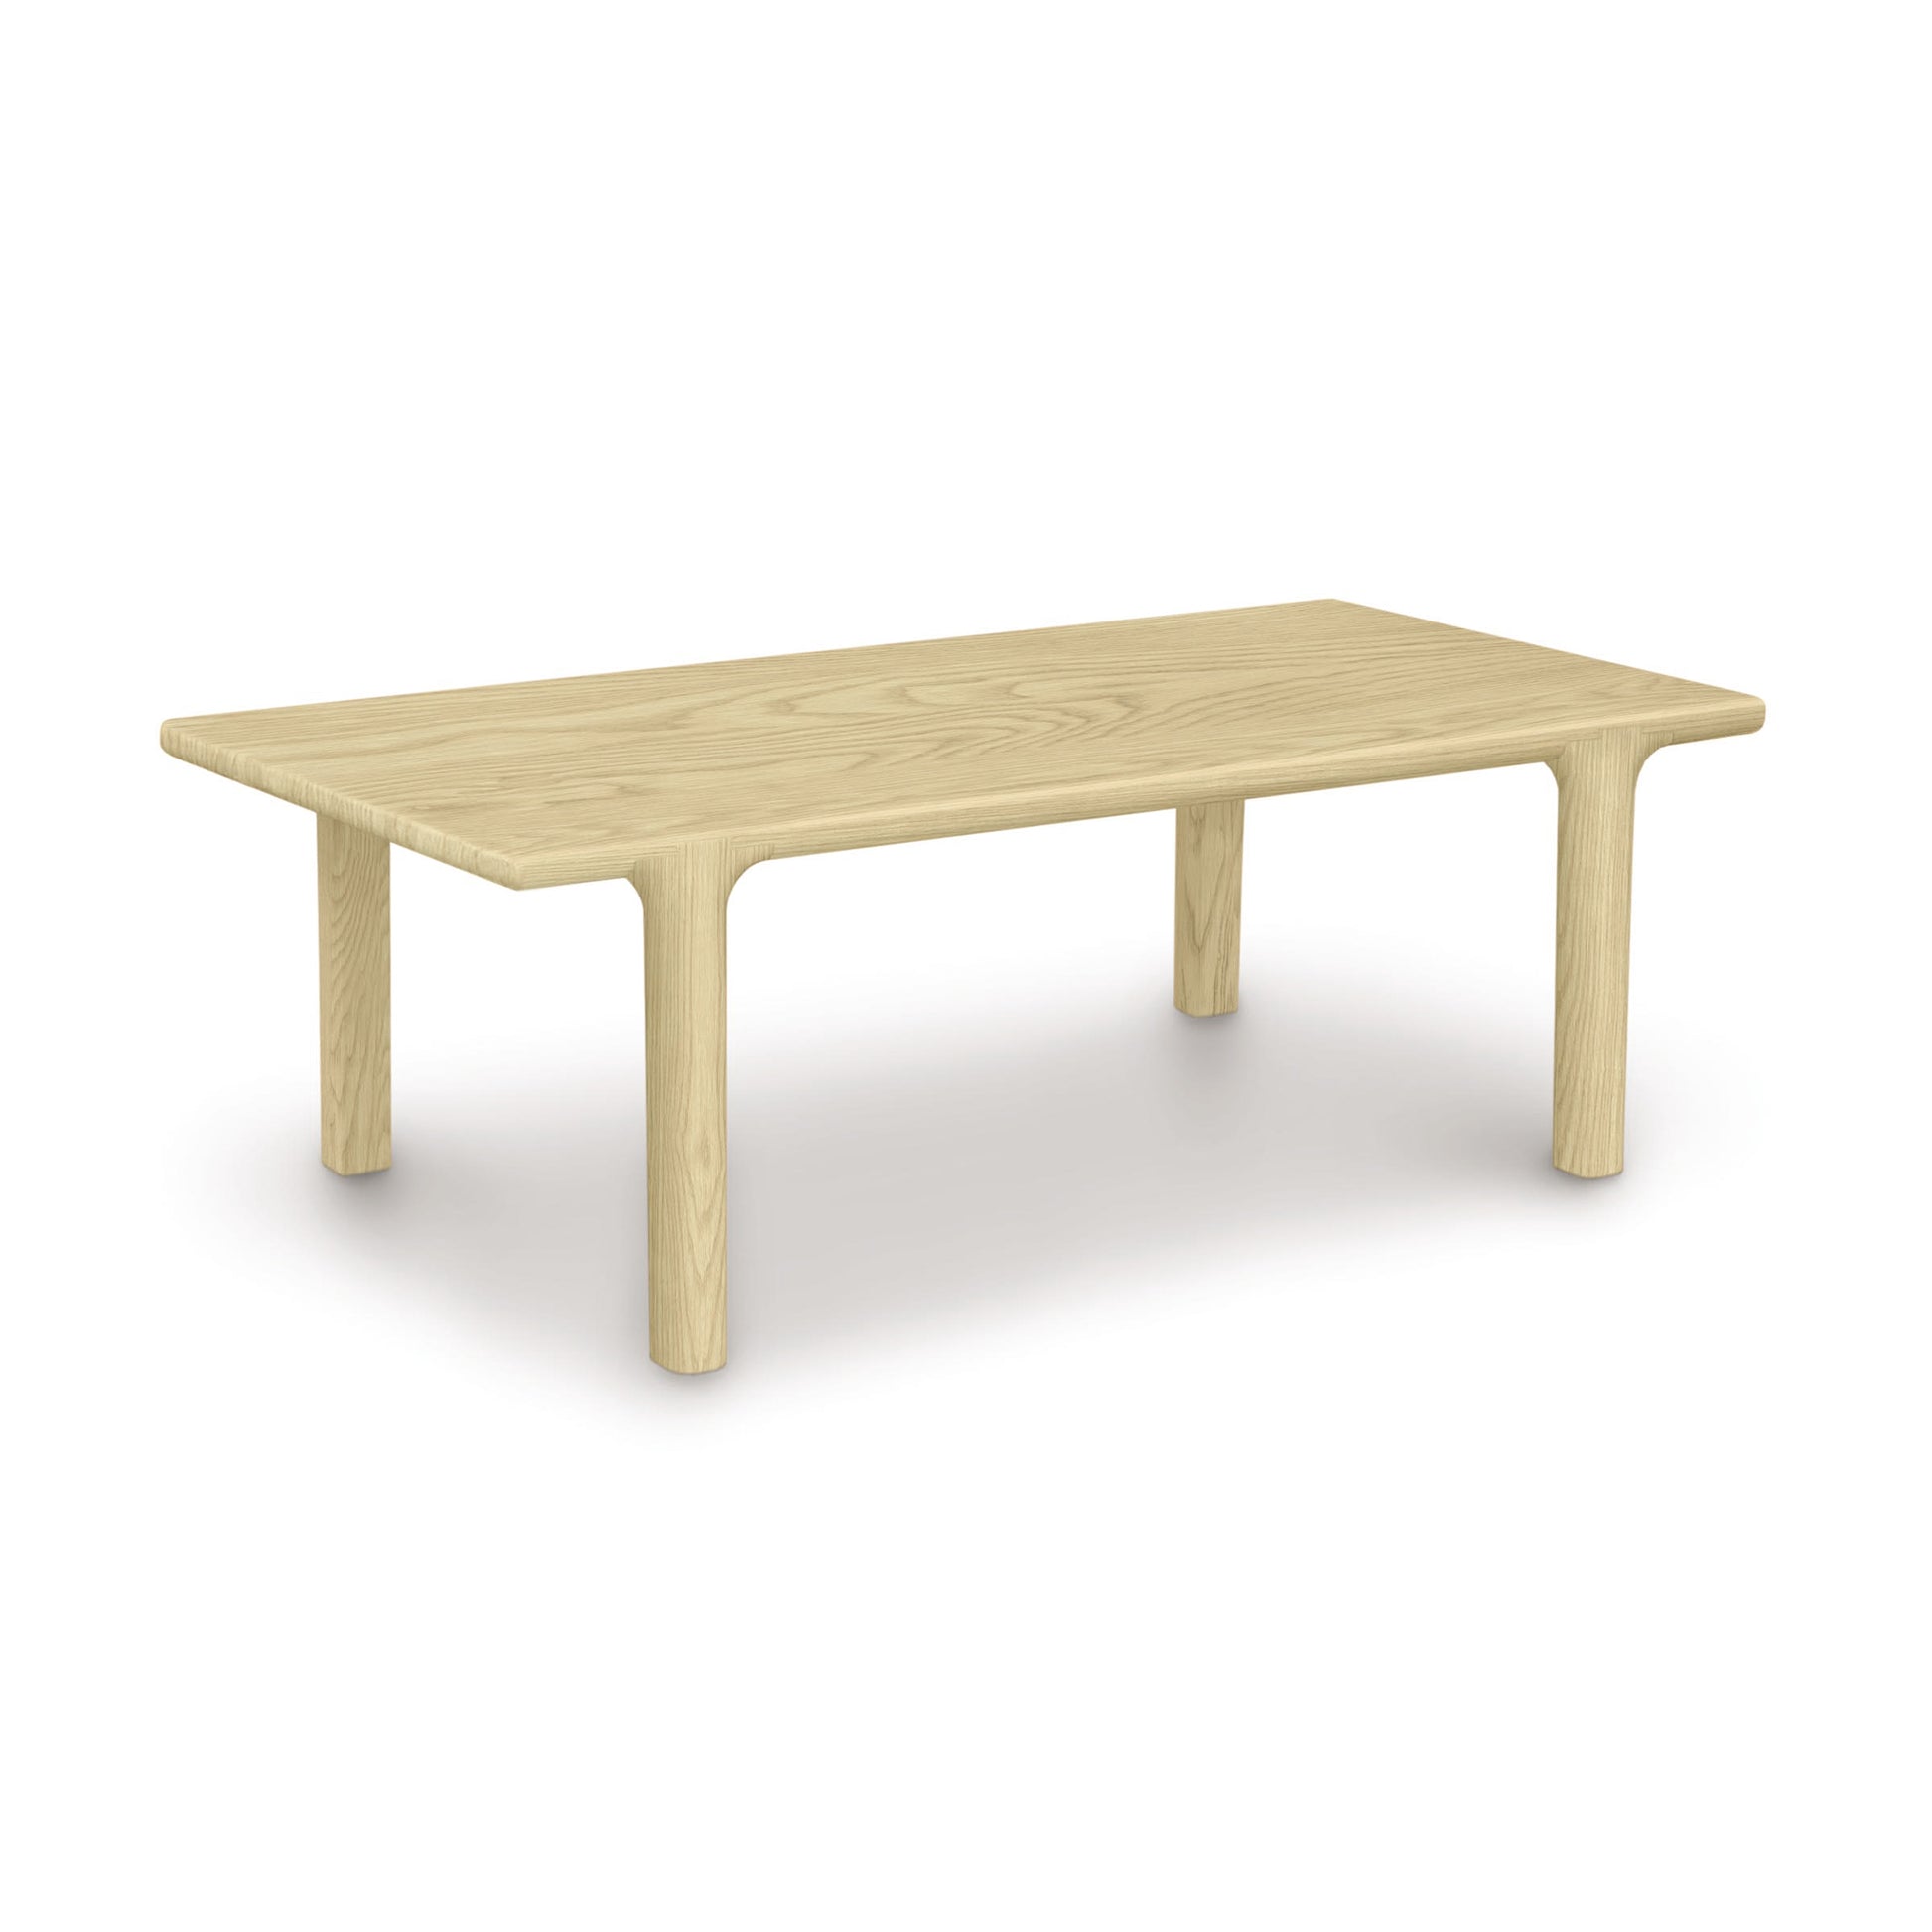 A simple Copeland Furniture Sierra Rectangular Coffee Table on a white background.